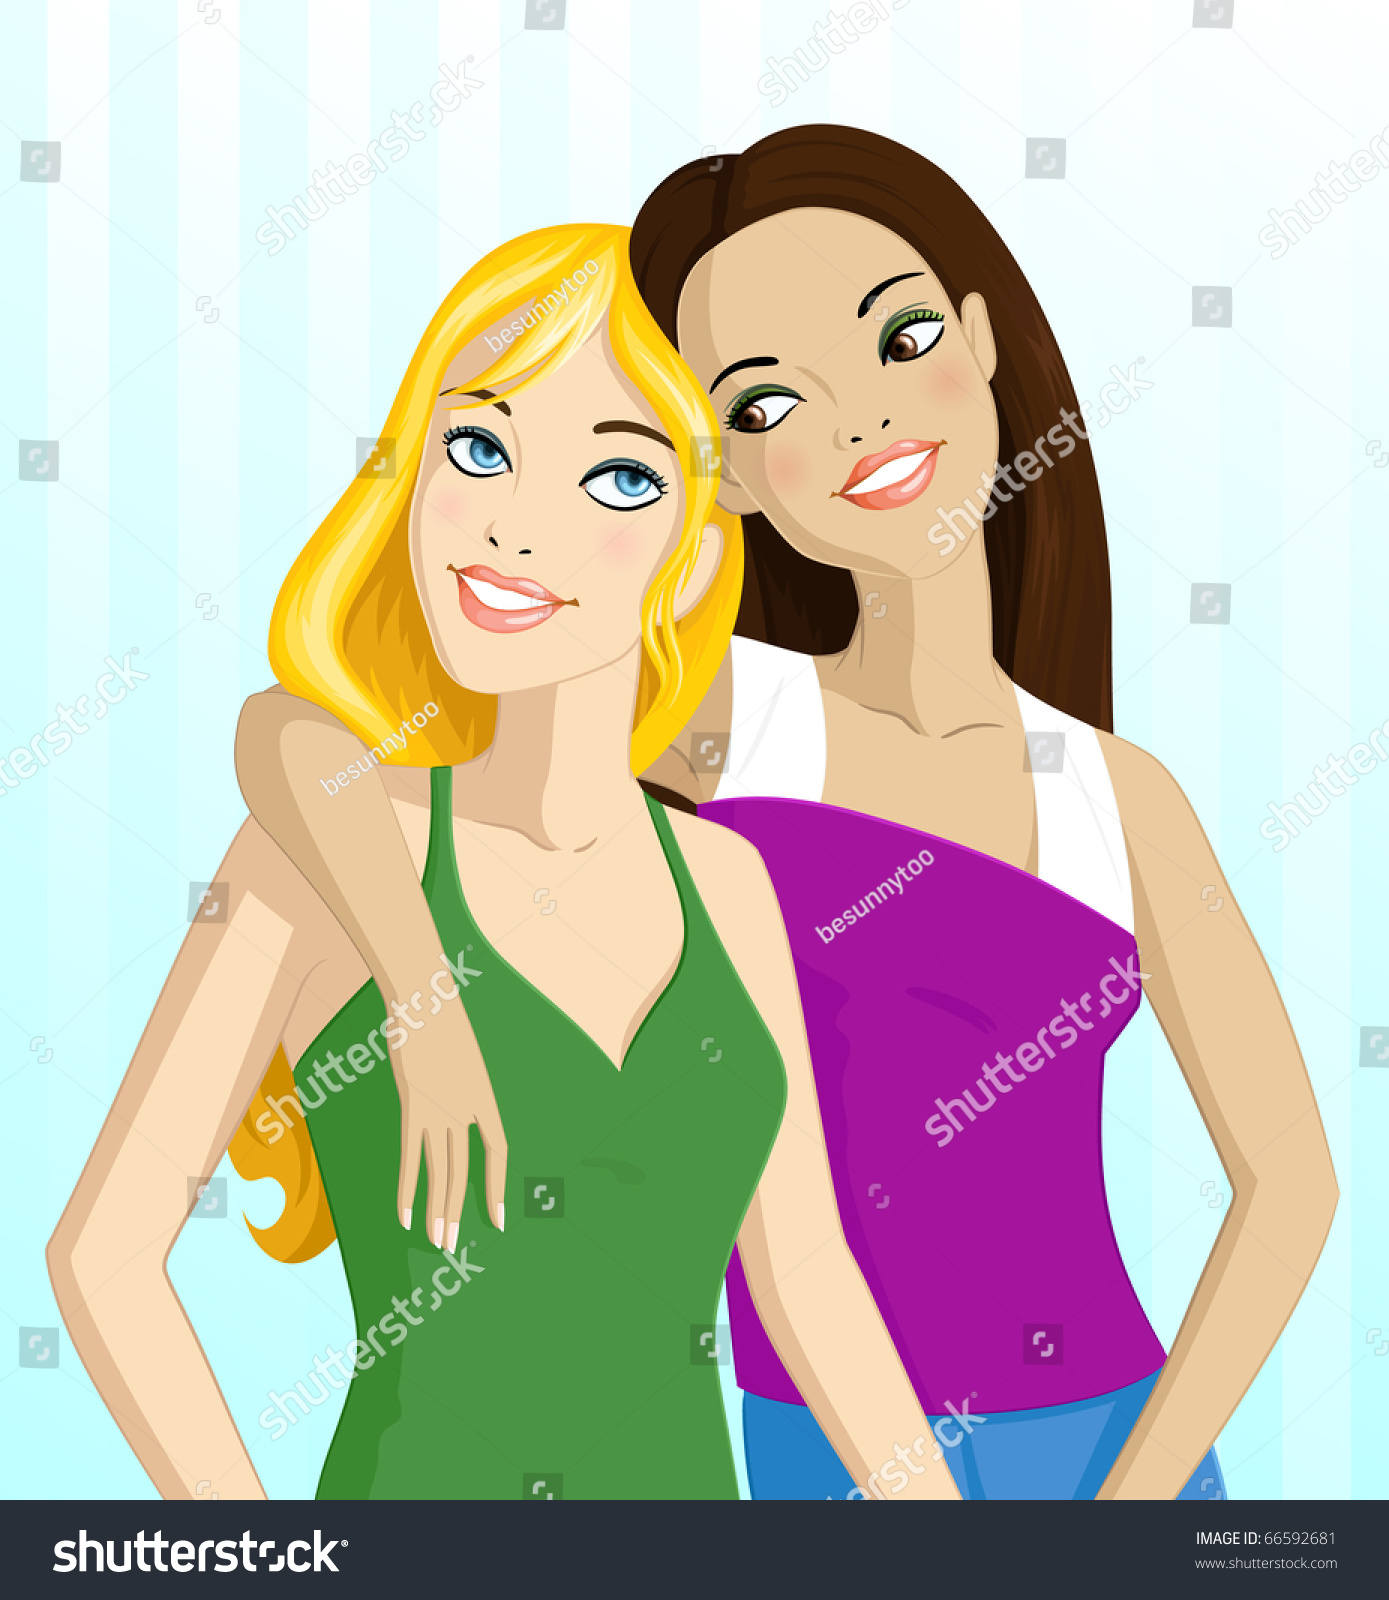 clipart pictures of girlfriends - photo #10